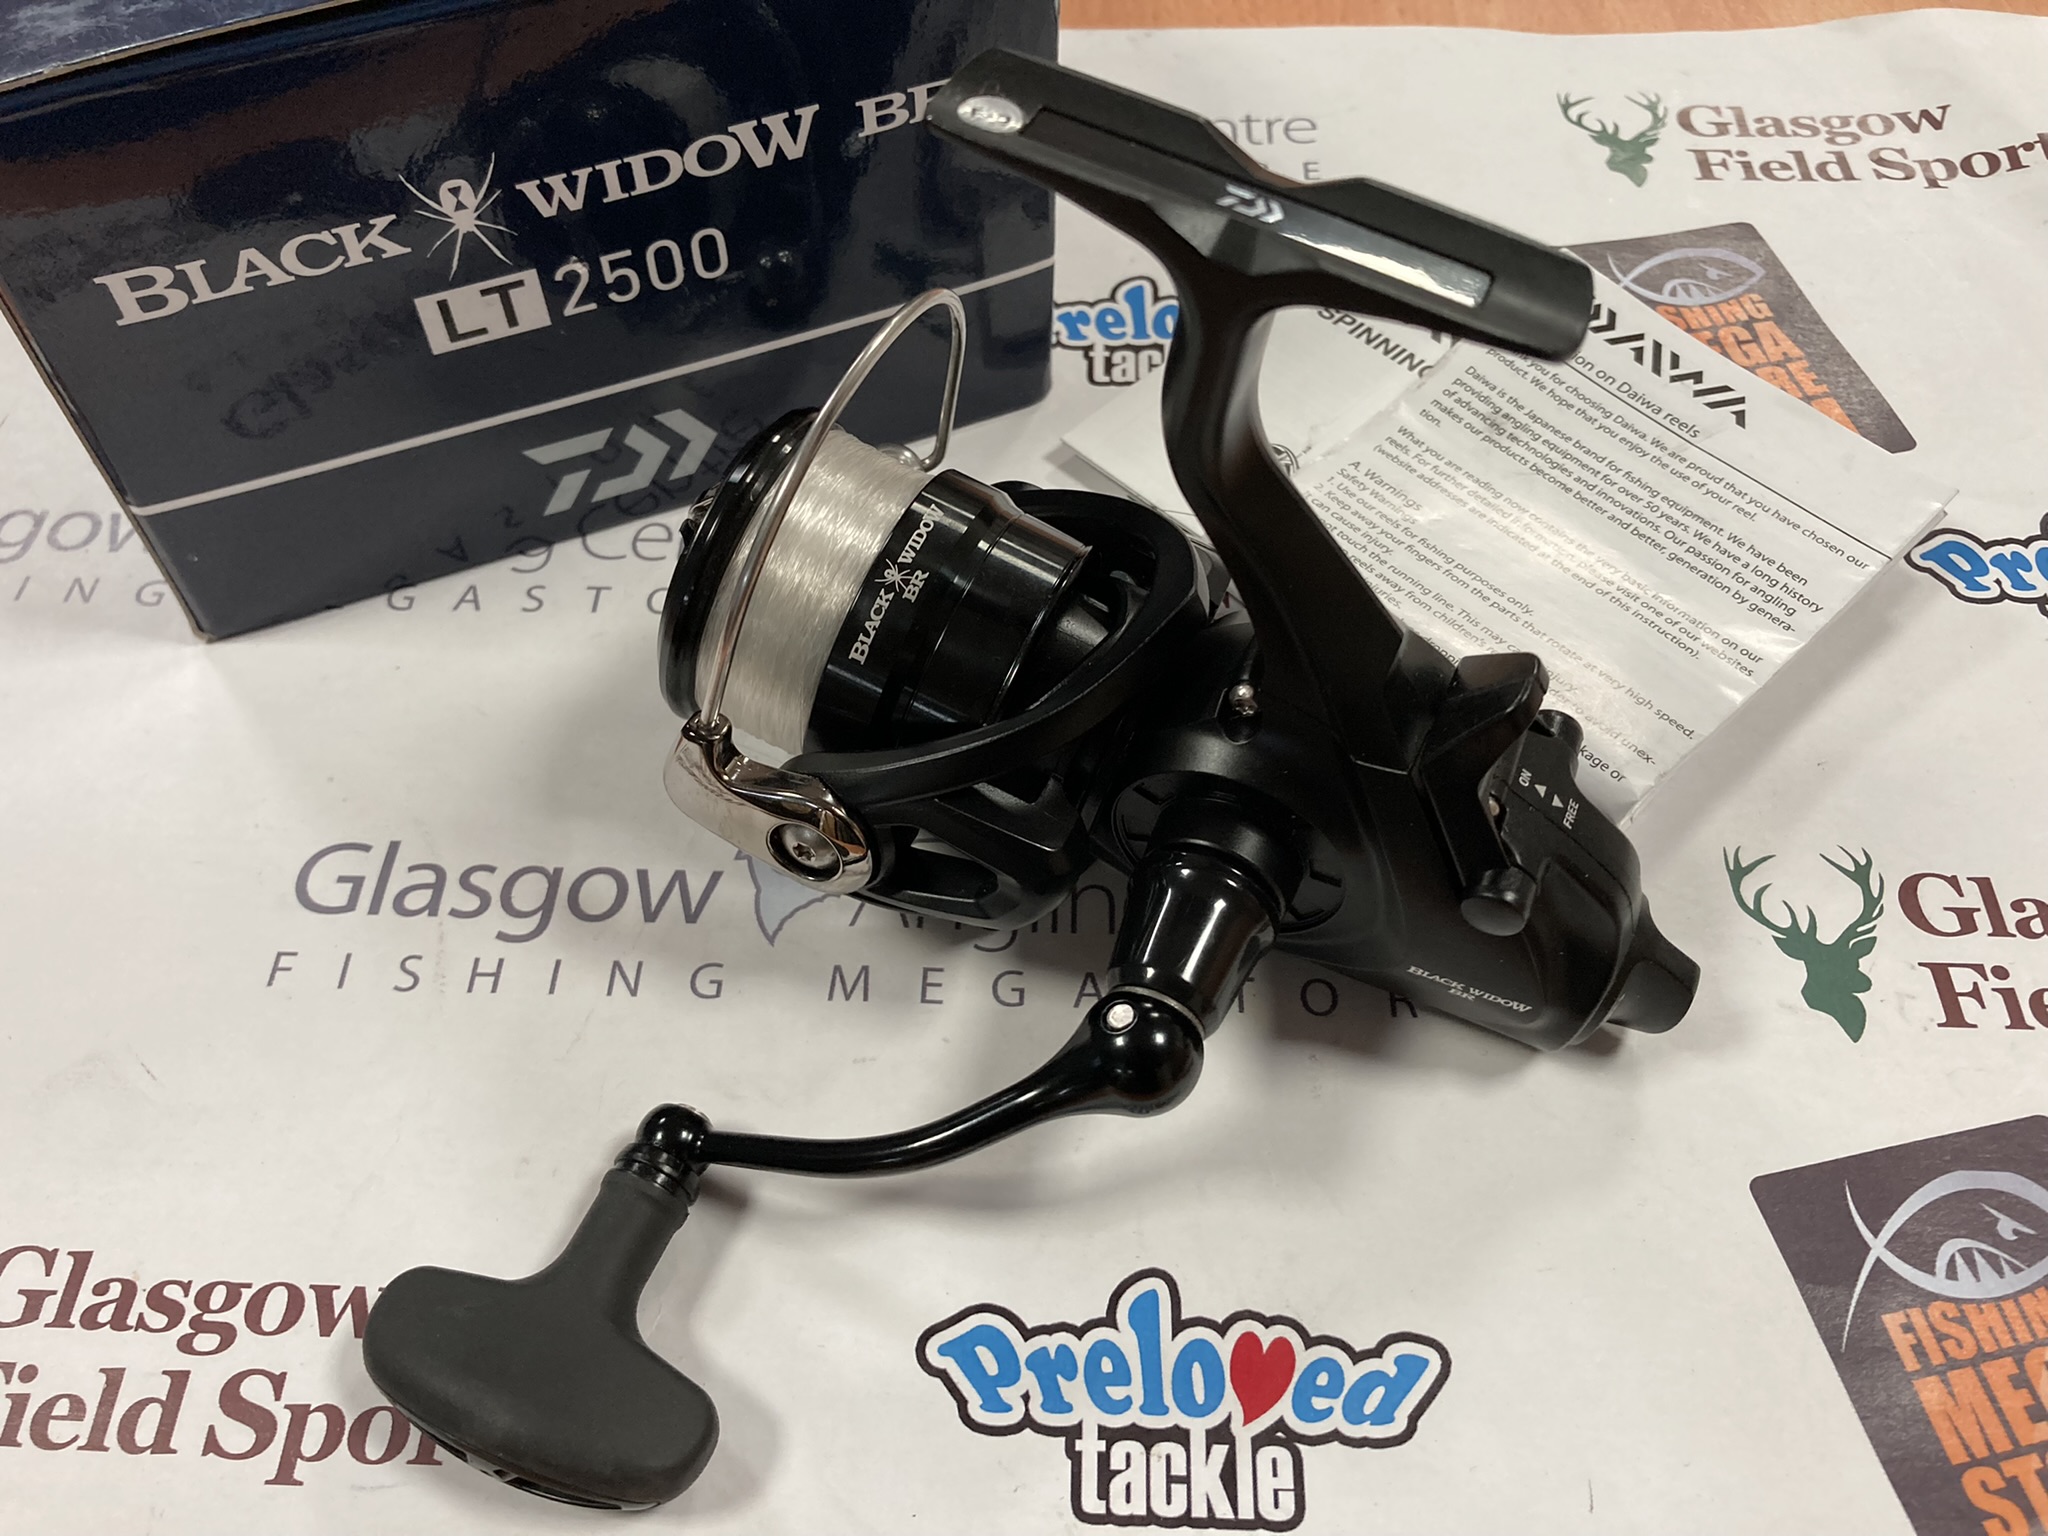 Preloved Daiwa Black Widow BR LT 2500 Baitrunner Reel (Boxed) - Excellent –  Glasgow Angling Centre